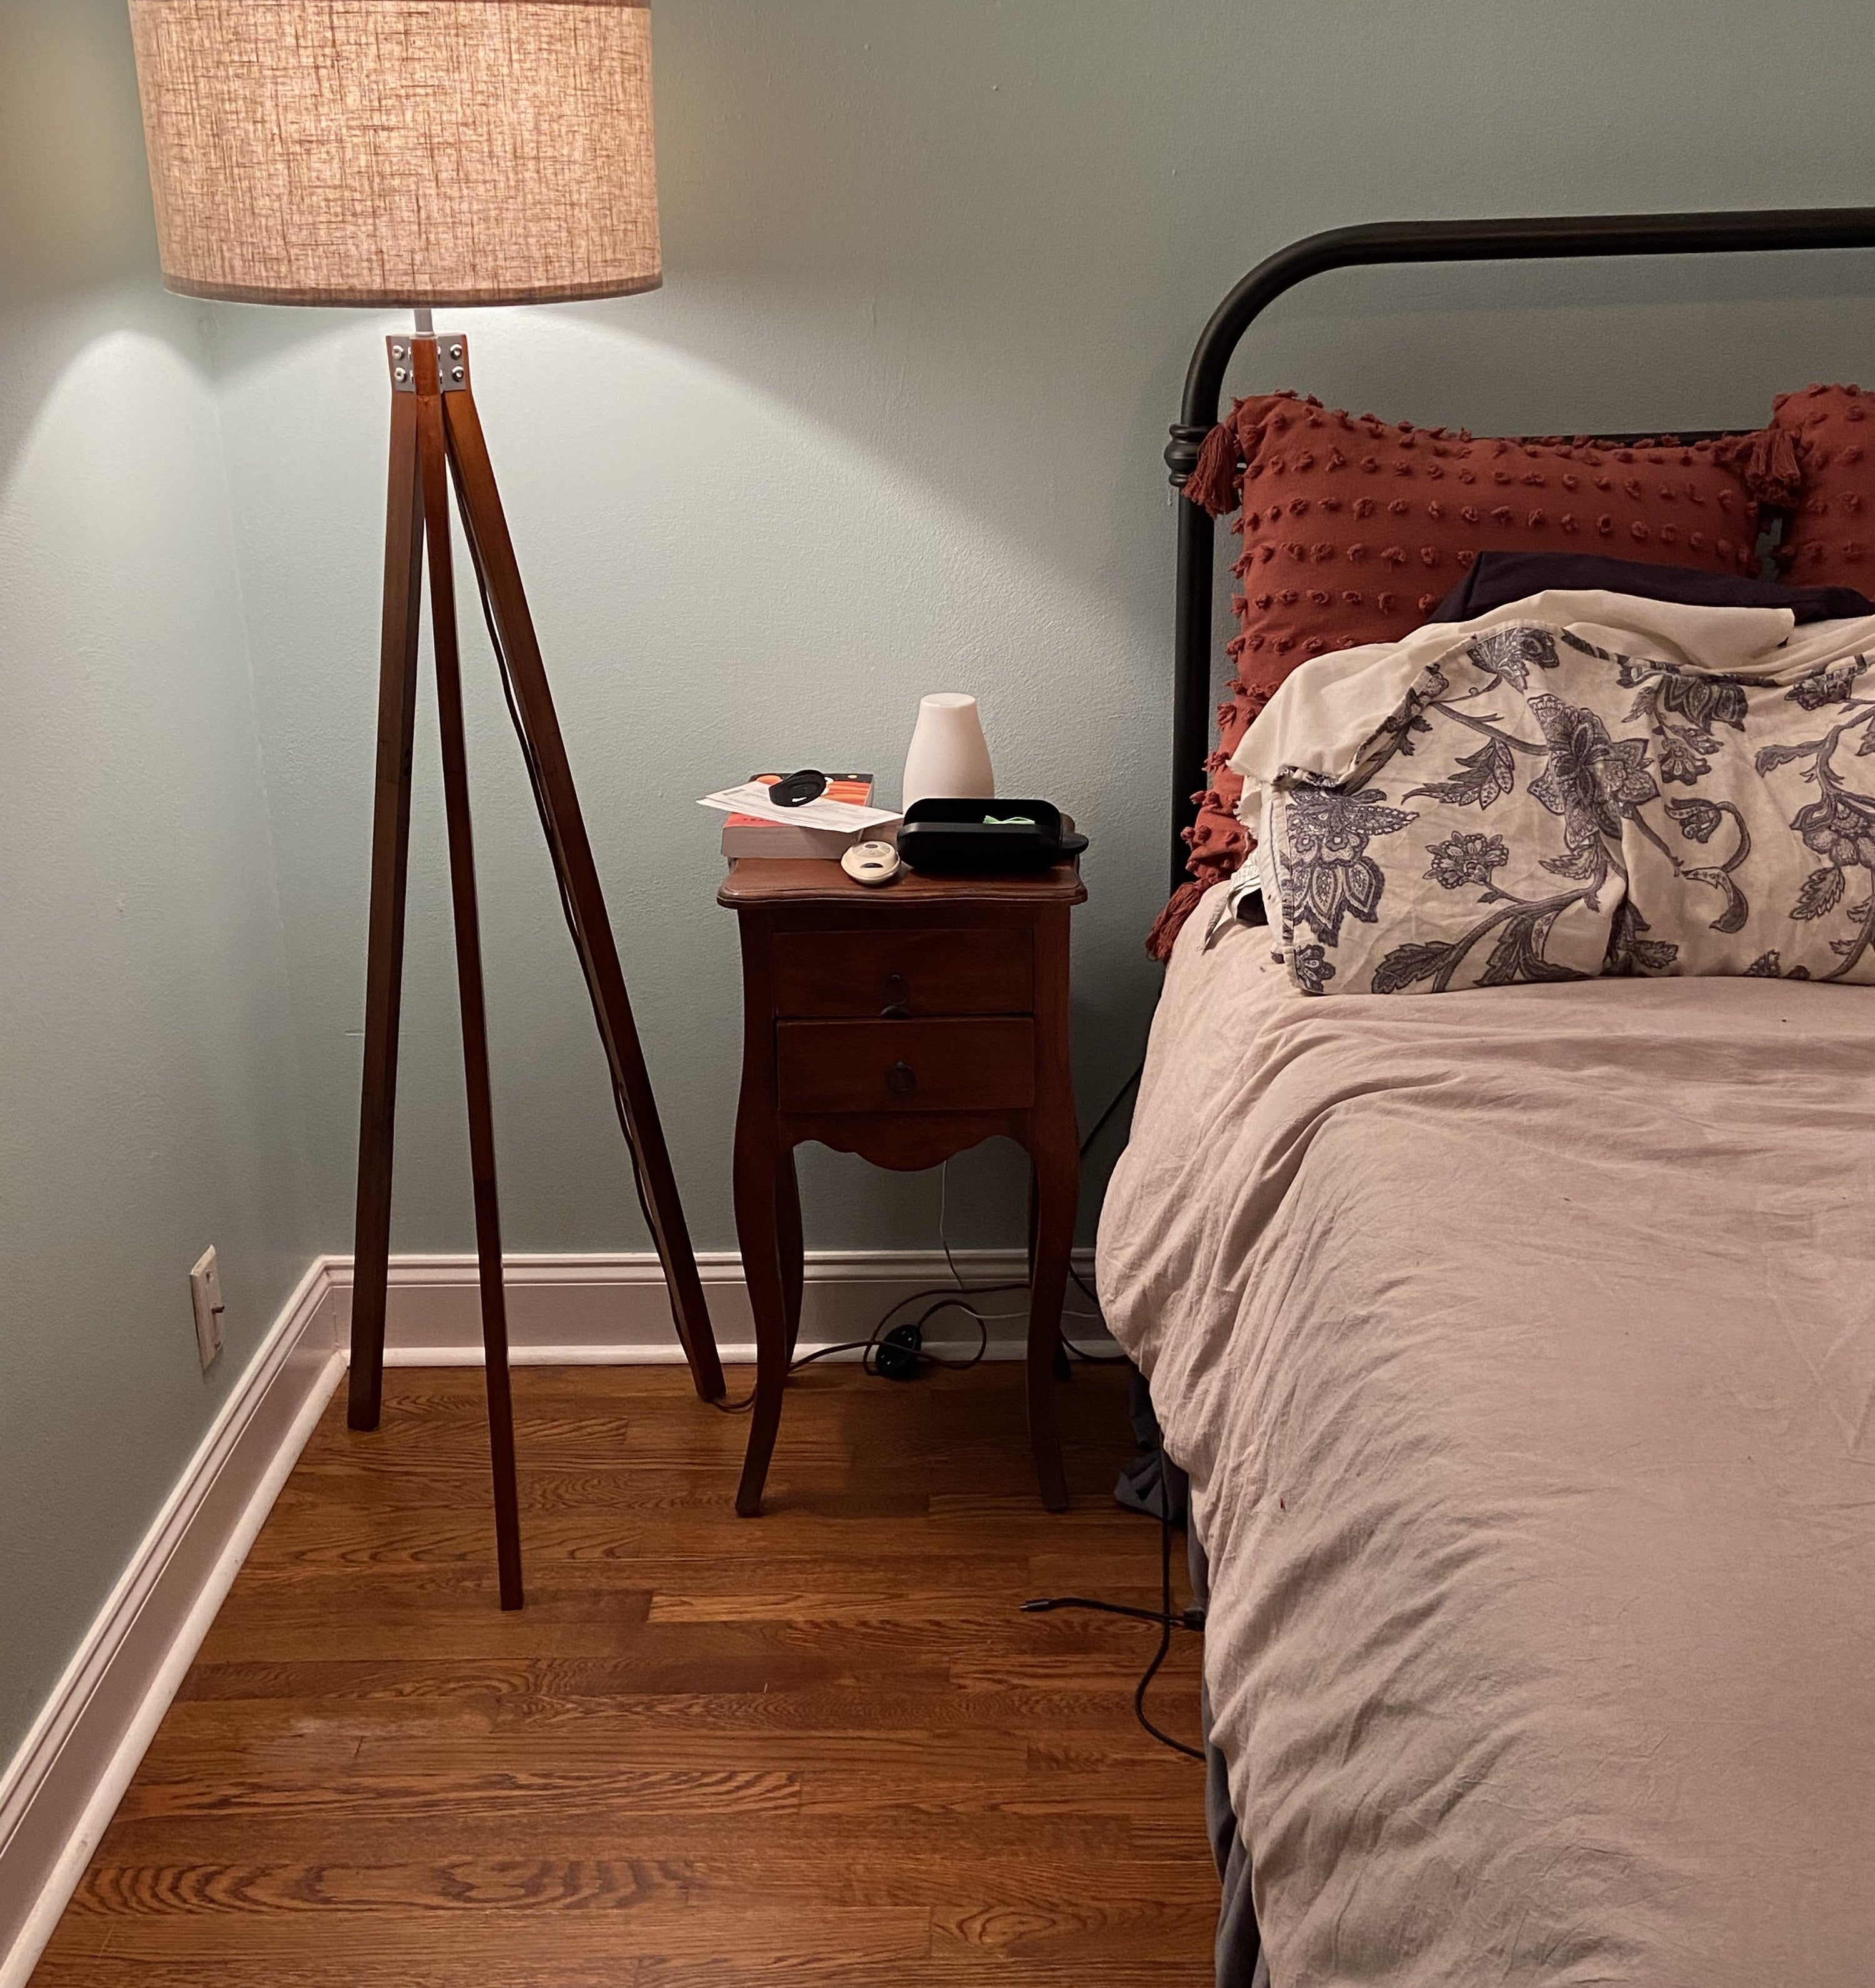 A reviewer photo of the lamp next to a bed